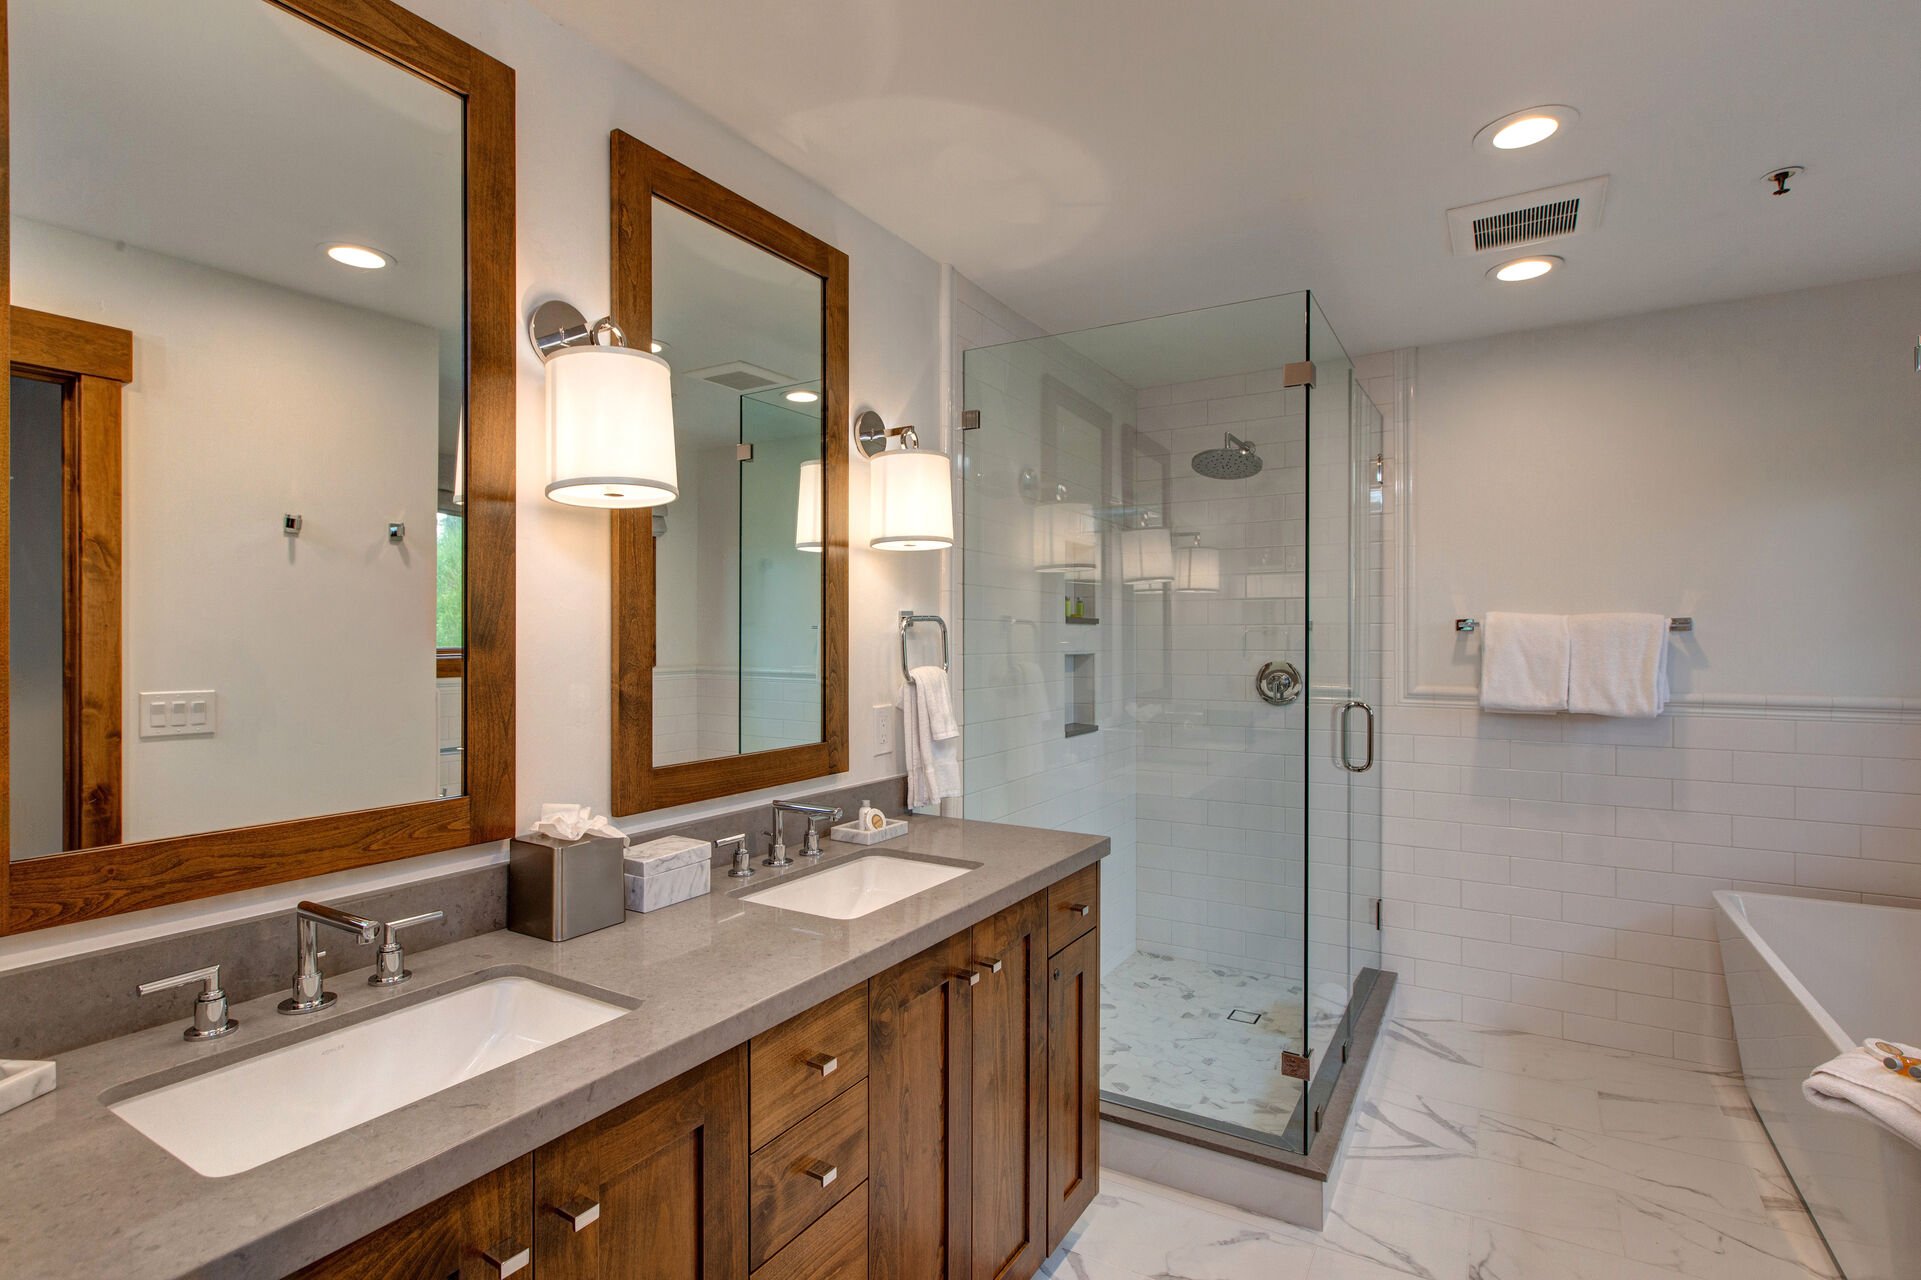 Renovated Main Level Master Bath with Double Sinks, Large Soaking Tub and Separate Shower